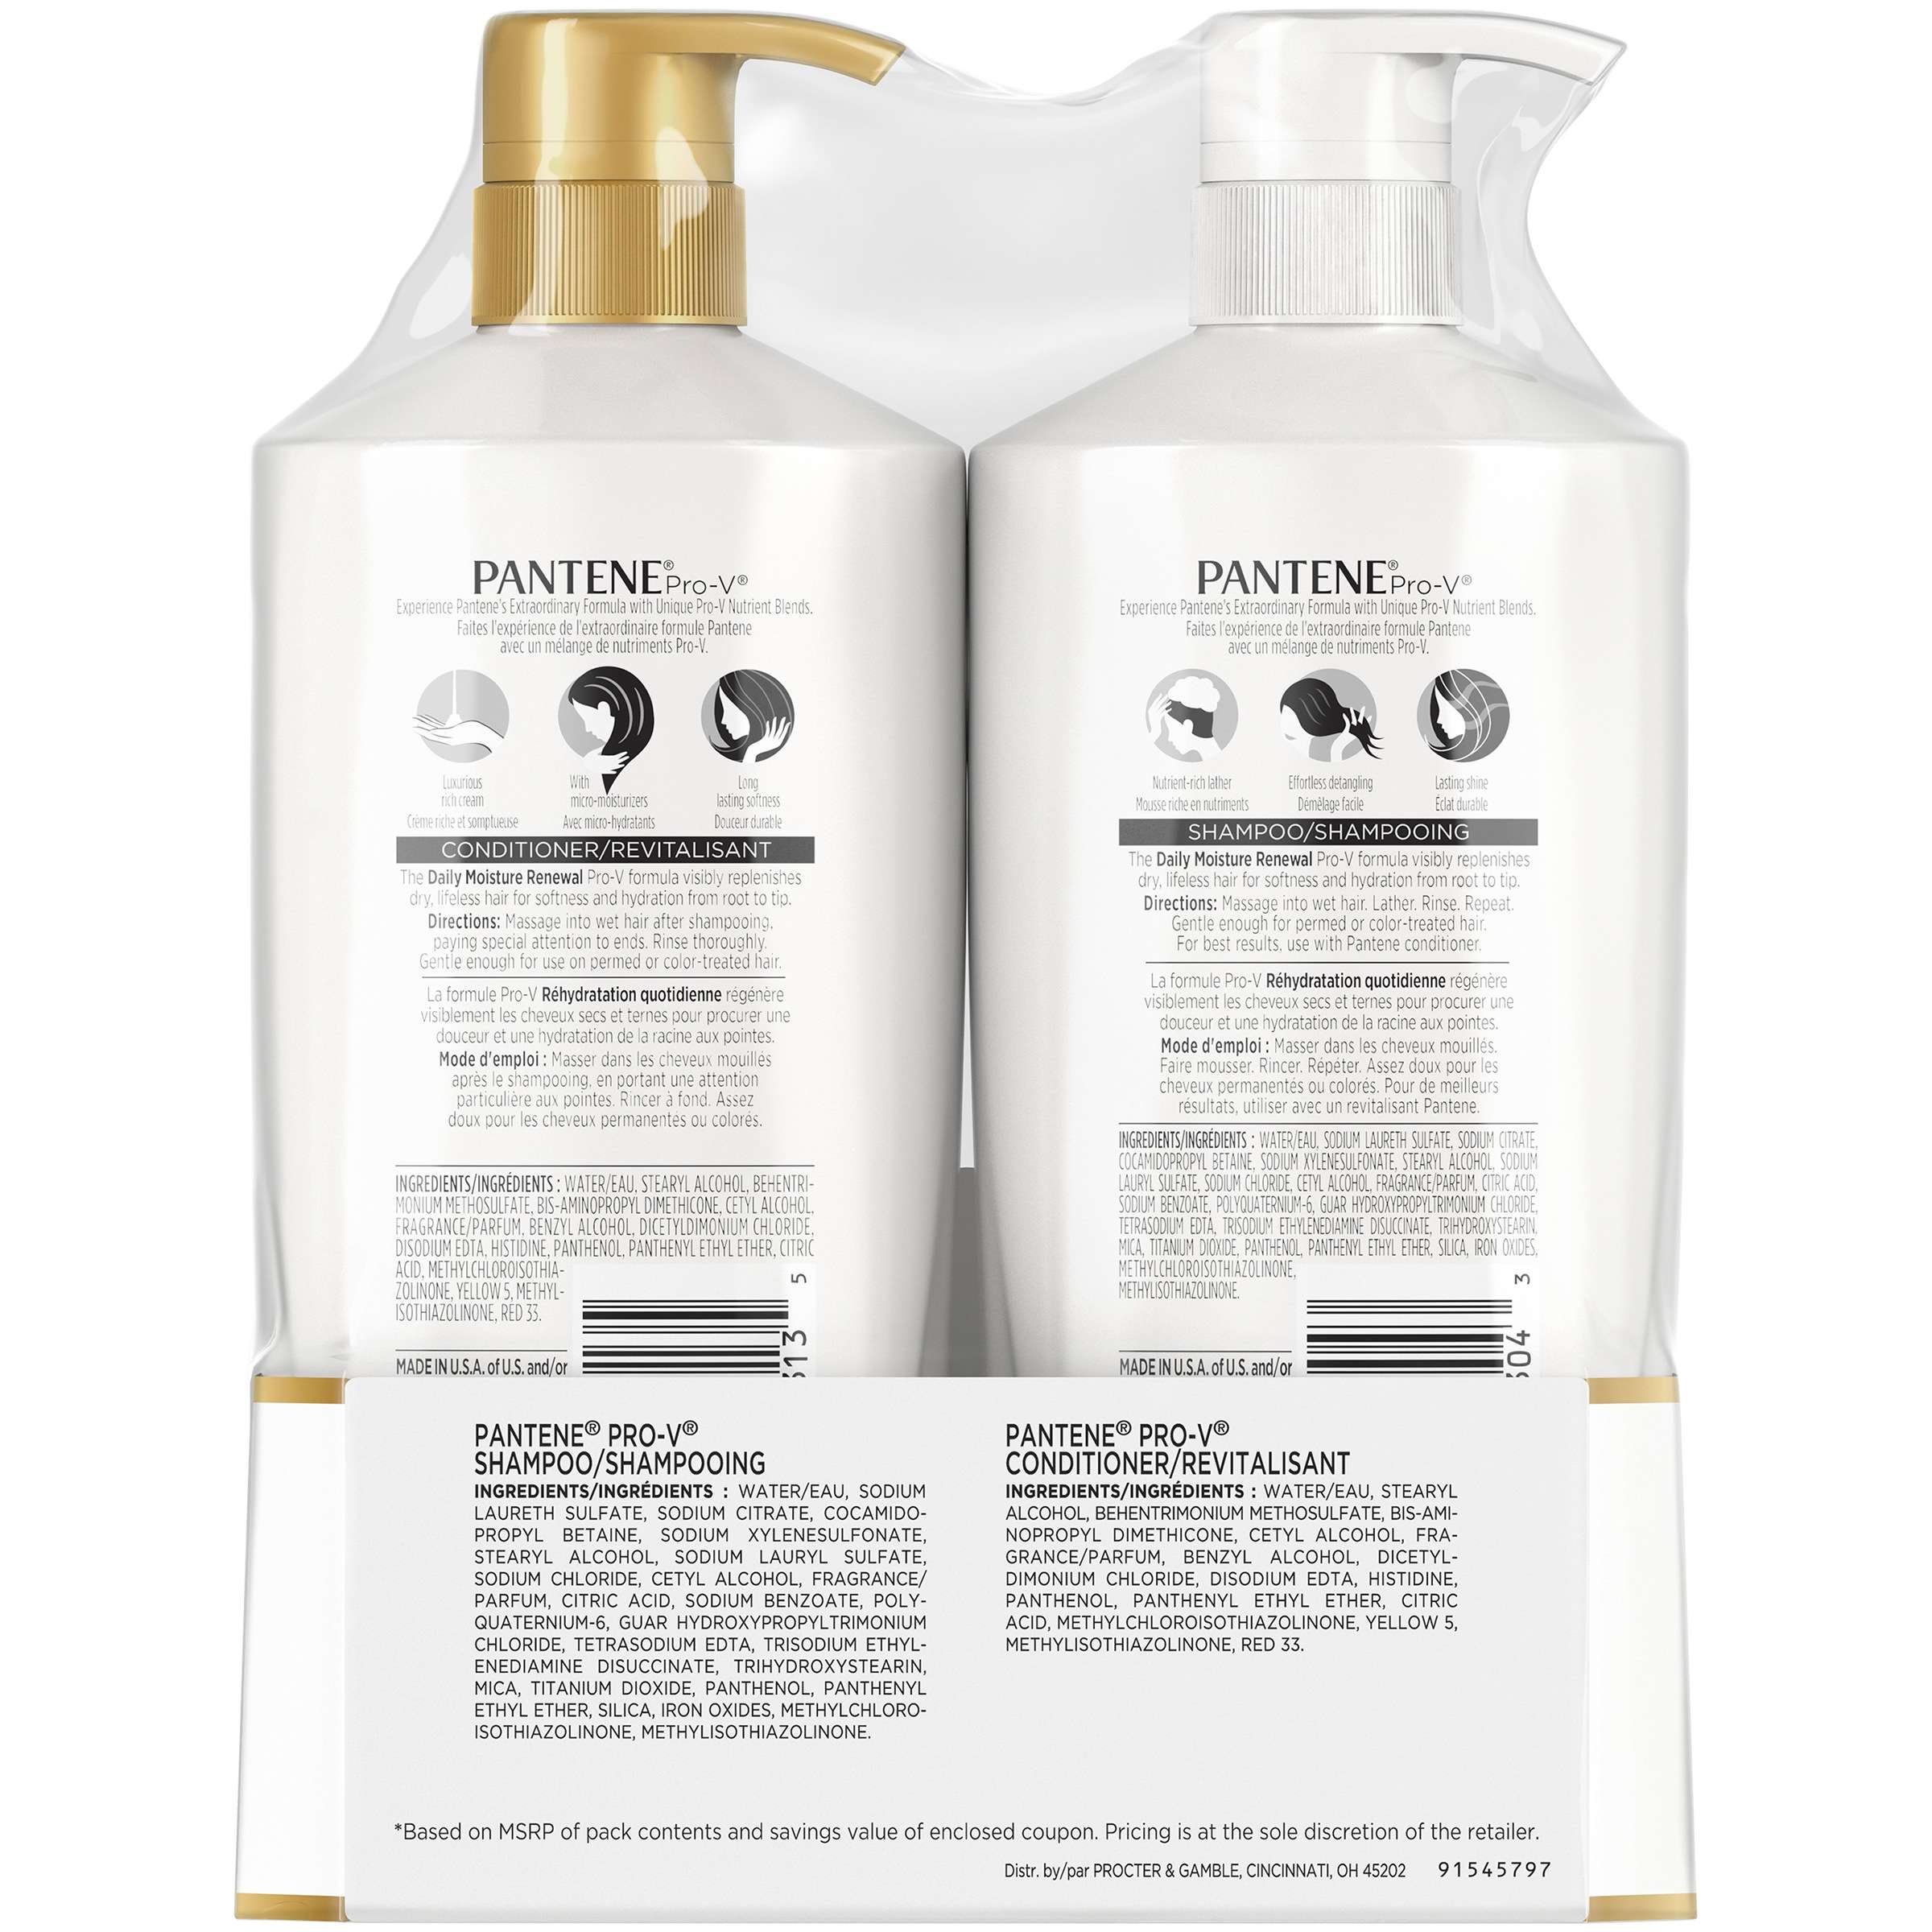 Pantene Pro-V Daily Moisture Renewal Shampoo and Conditioner Dual Pack, 48.7 fl oz - image 3 of 6